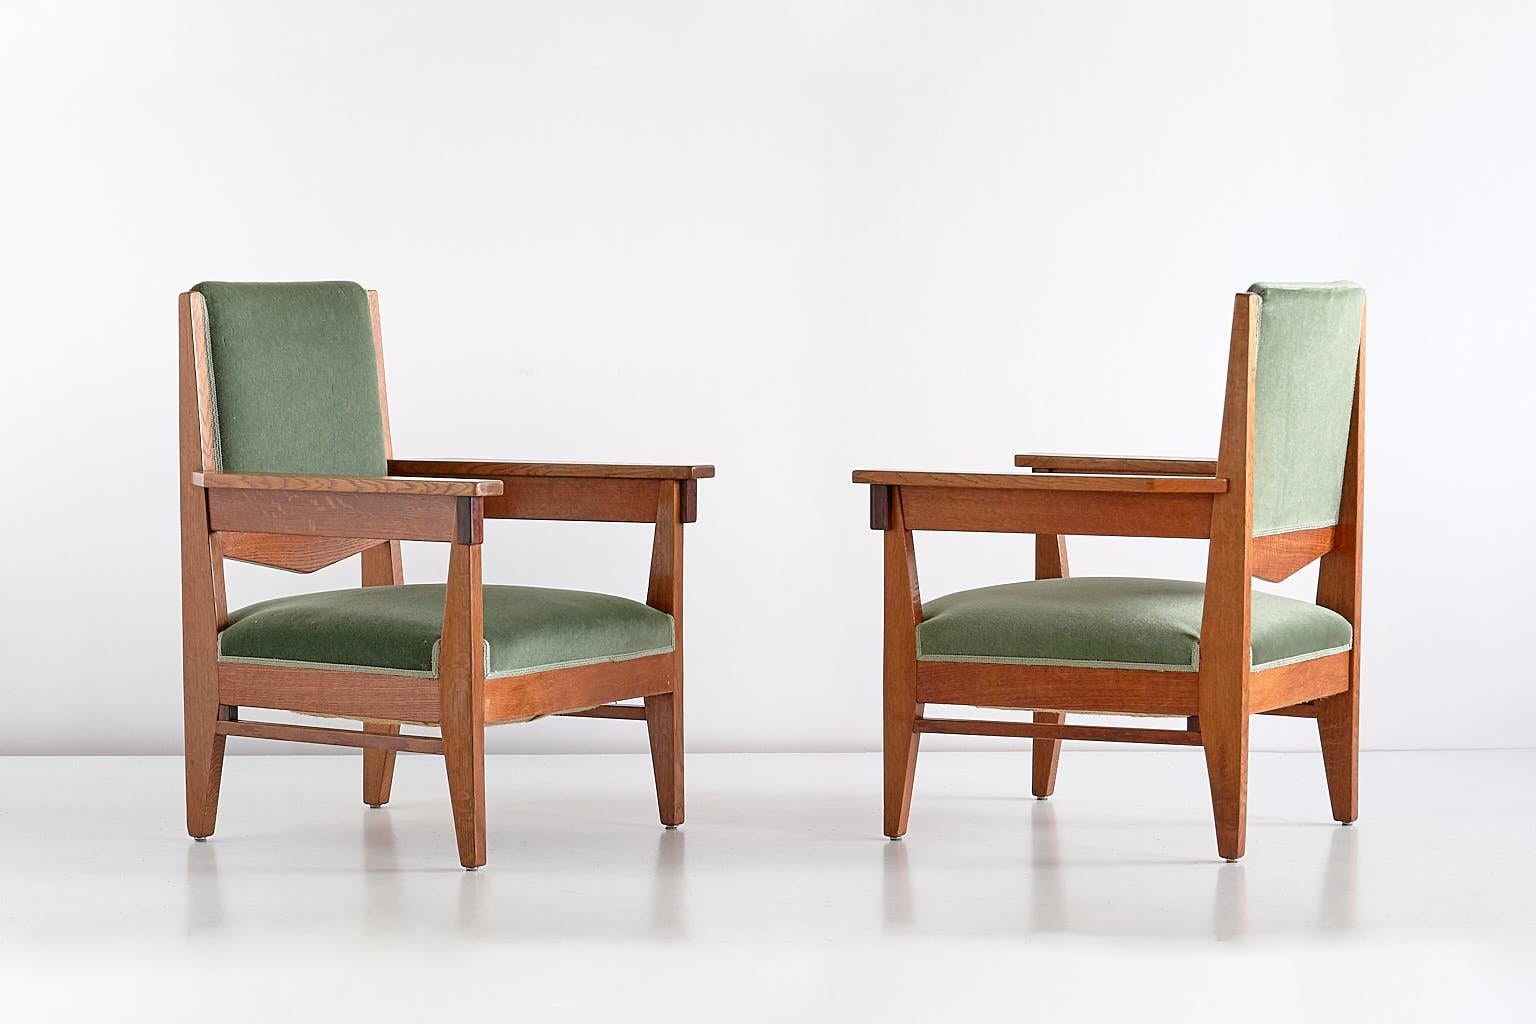 This rare pair of armchairs was designed by Anton Lucas and produced in Leiden, The Netherlands circa 1925. The frames are made of solid oakwood, with a geometric front detail in Macassar ebony. The chairs retain their presumably original green